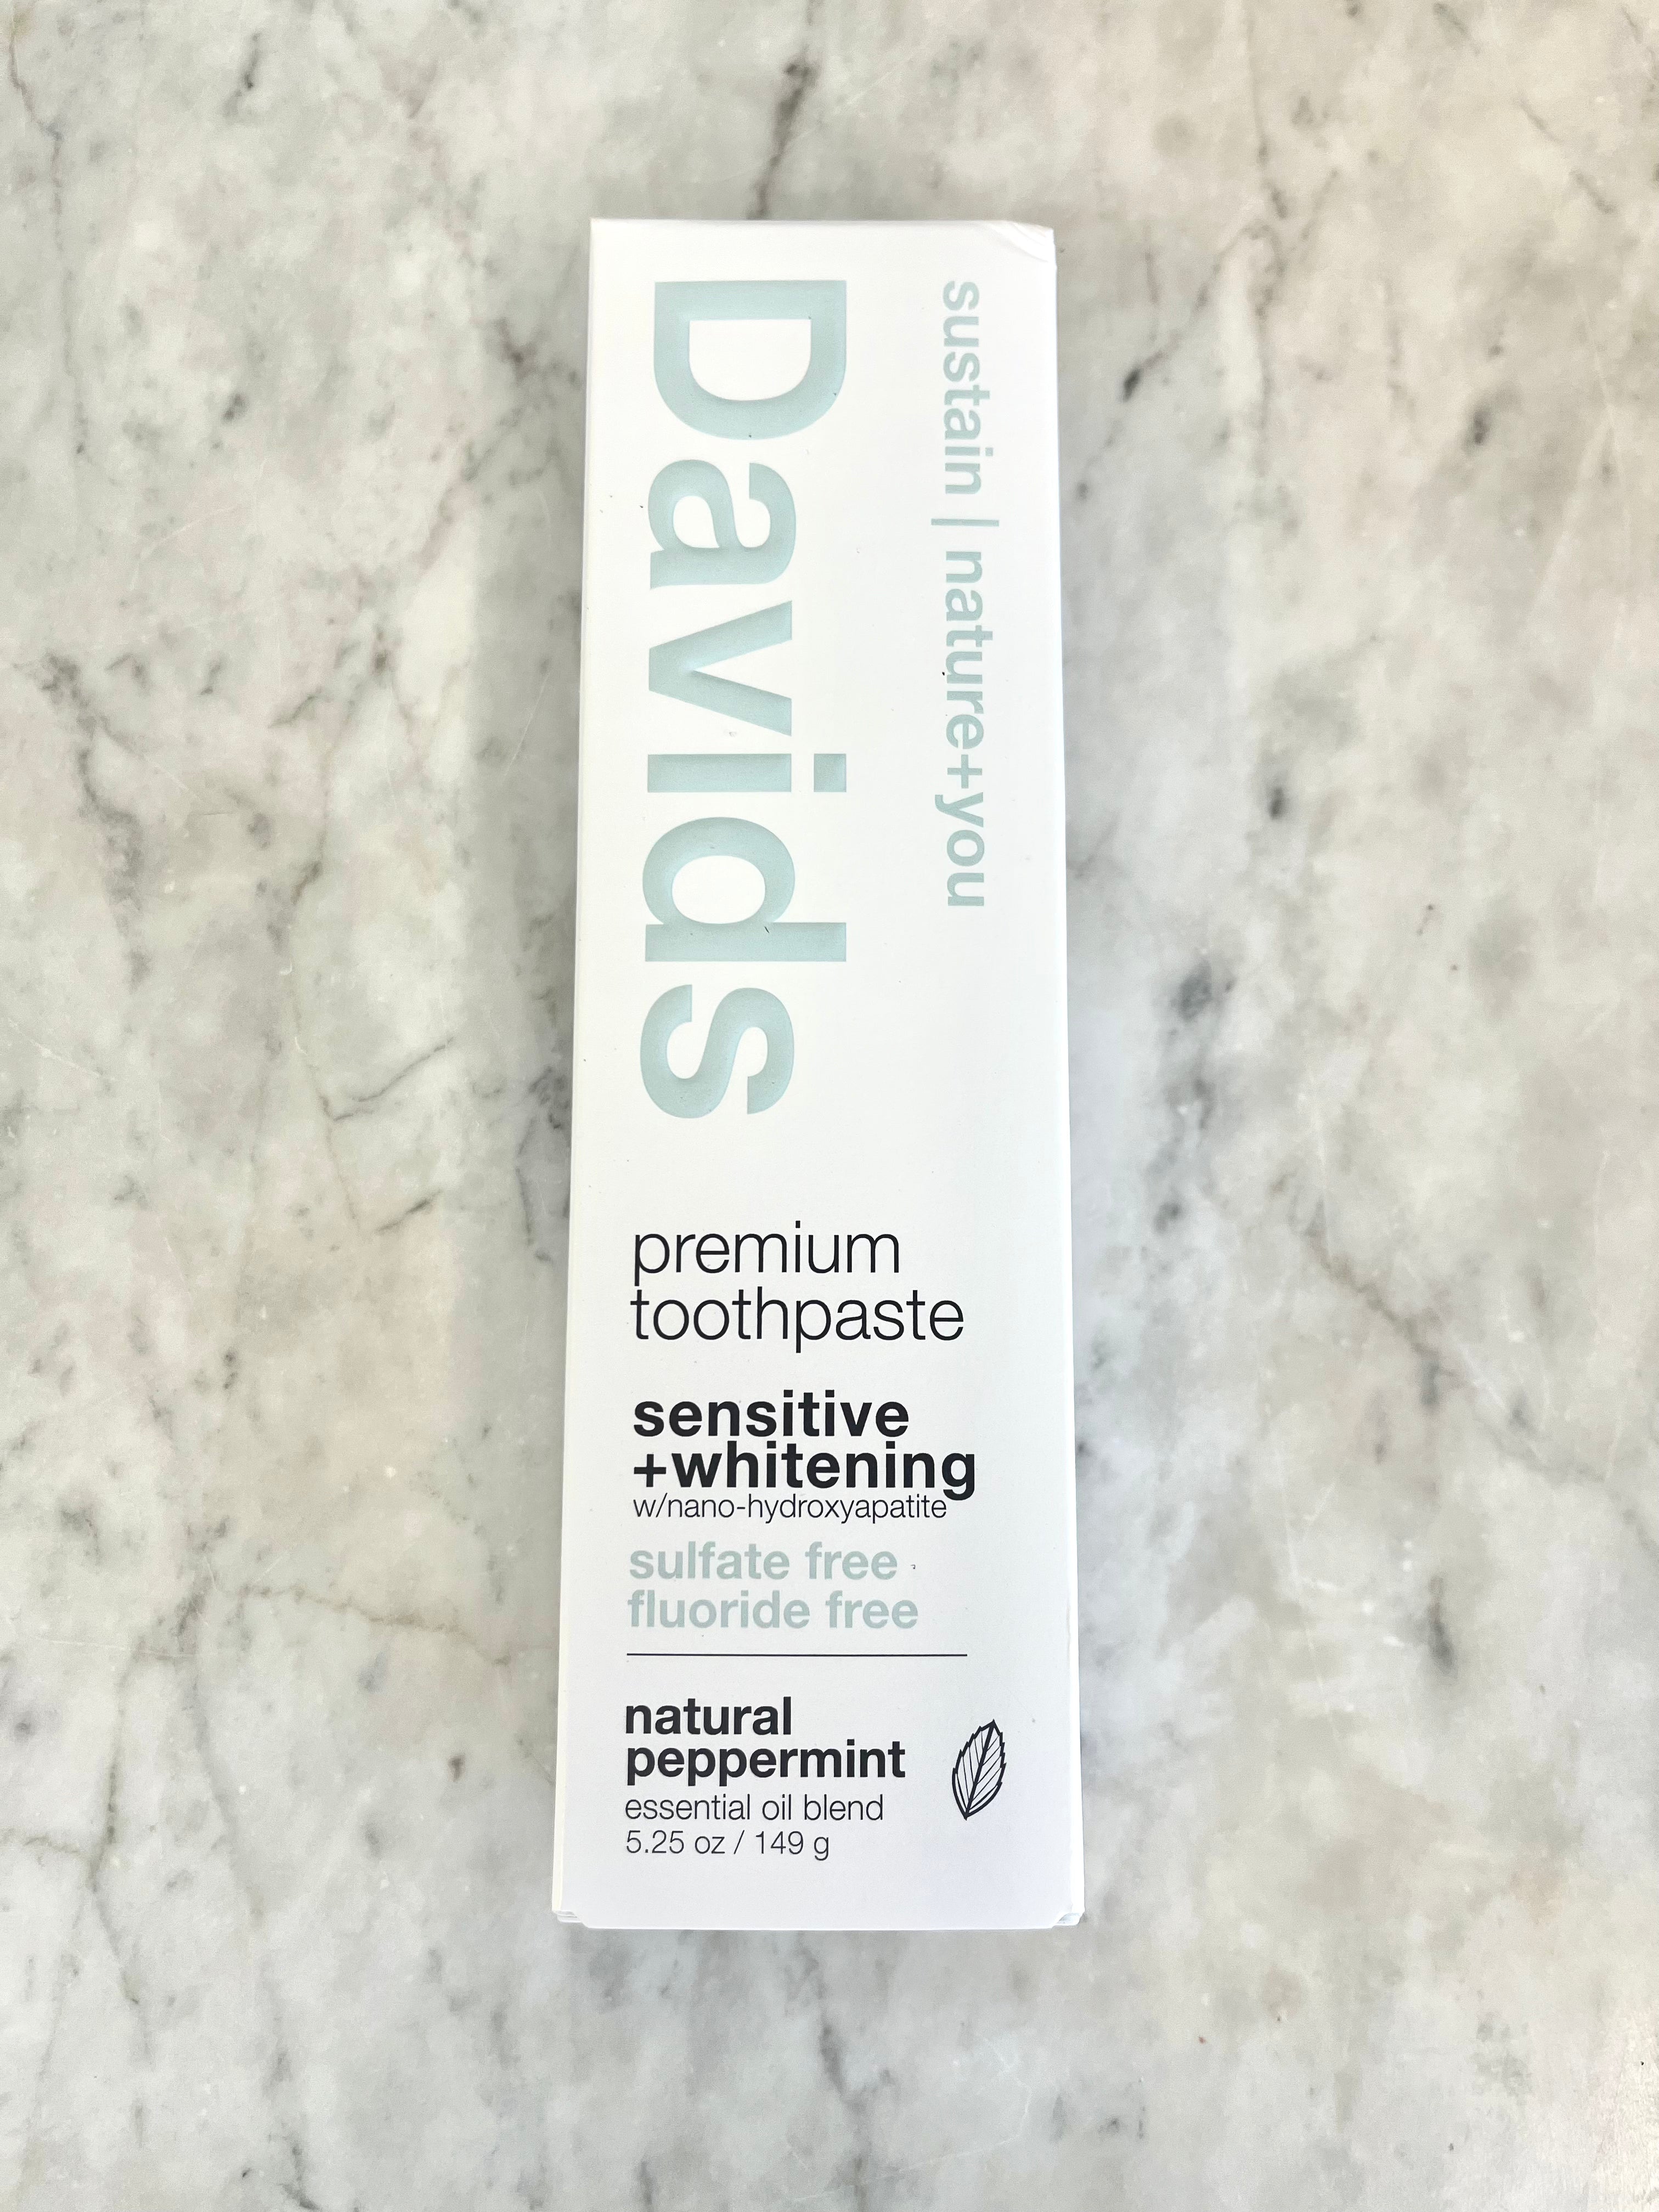 David’s Natural Toothpaste